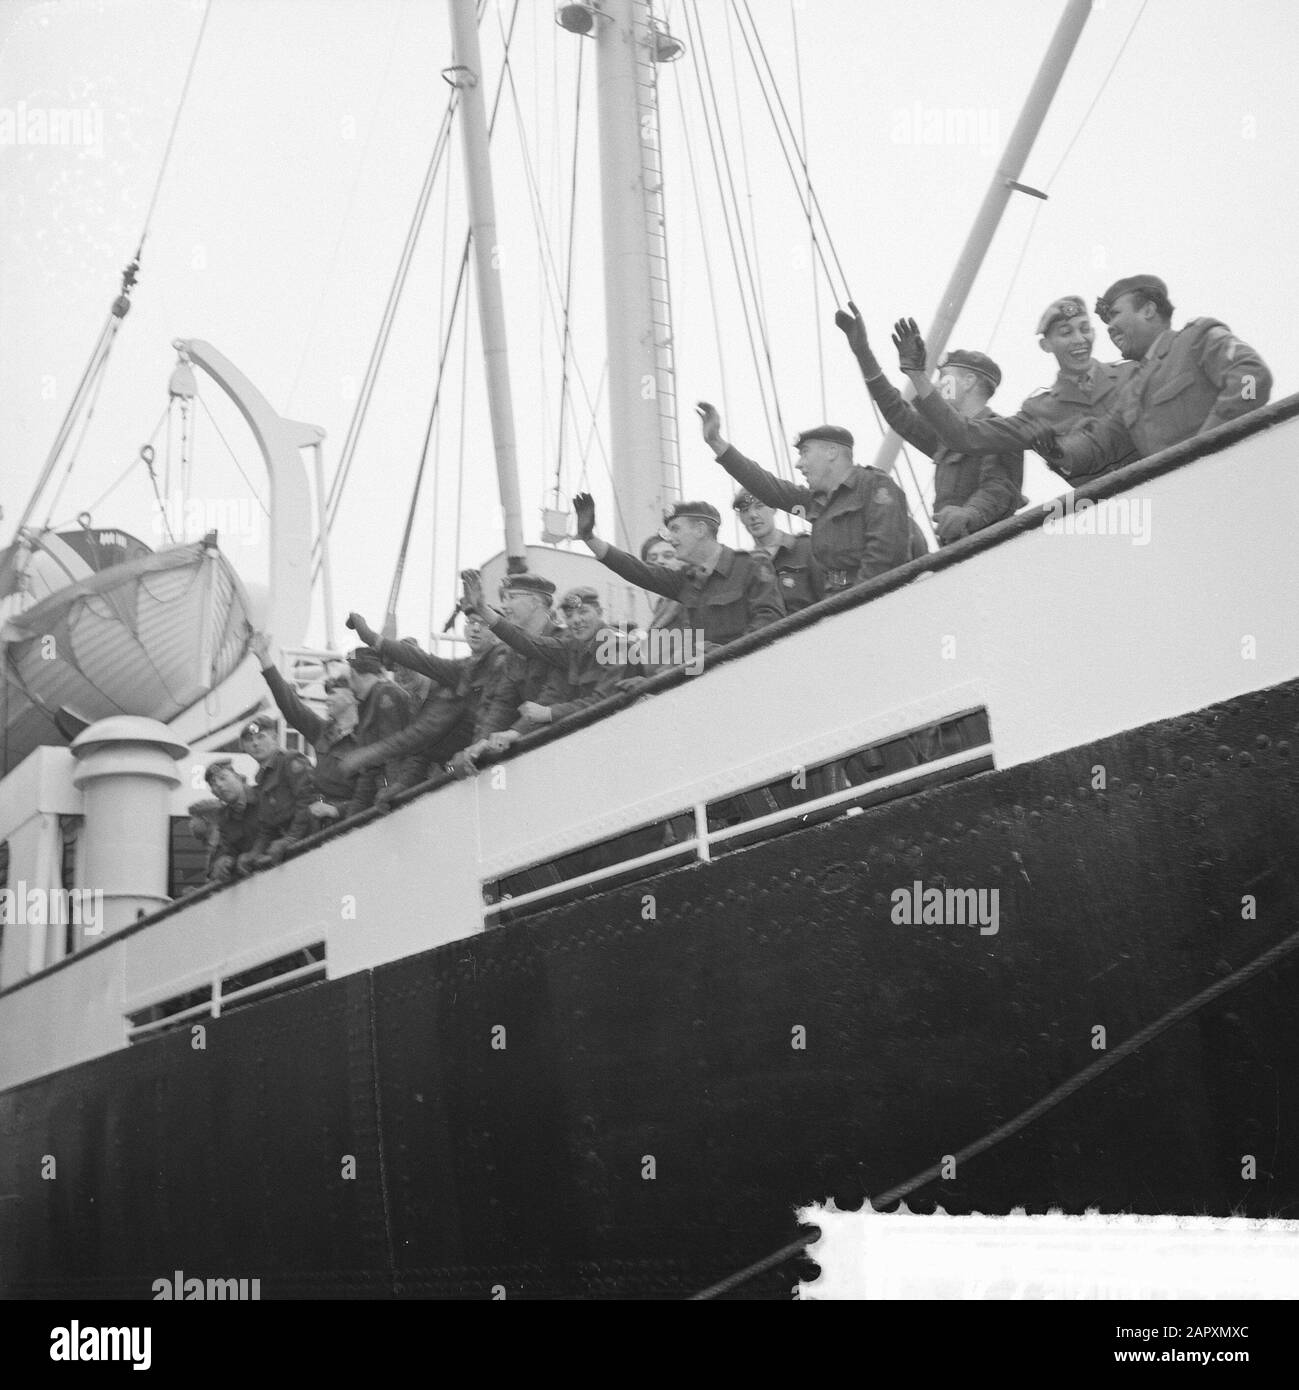 Departure first detachment of the first Surinamese company per Ms. Willemstad to Suriname, soldiers waving at farewell Date: 13 January 1961 Location: Suriname Keywords: FEED, COMPAGNIES, DETACHEMENTS, Soldiers Institution name: MS Willemstad Stock Photo